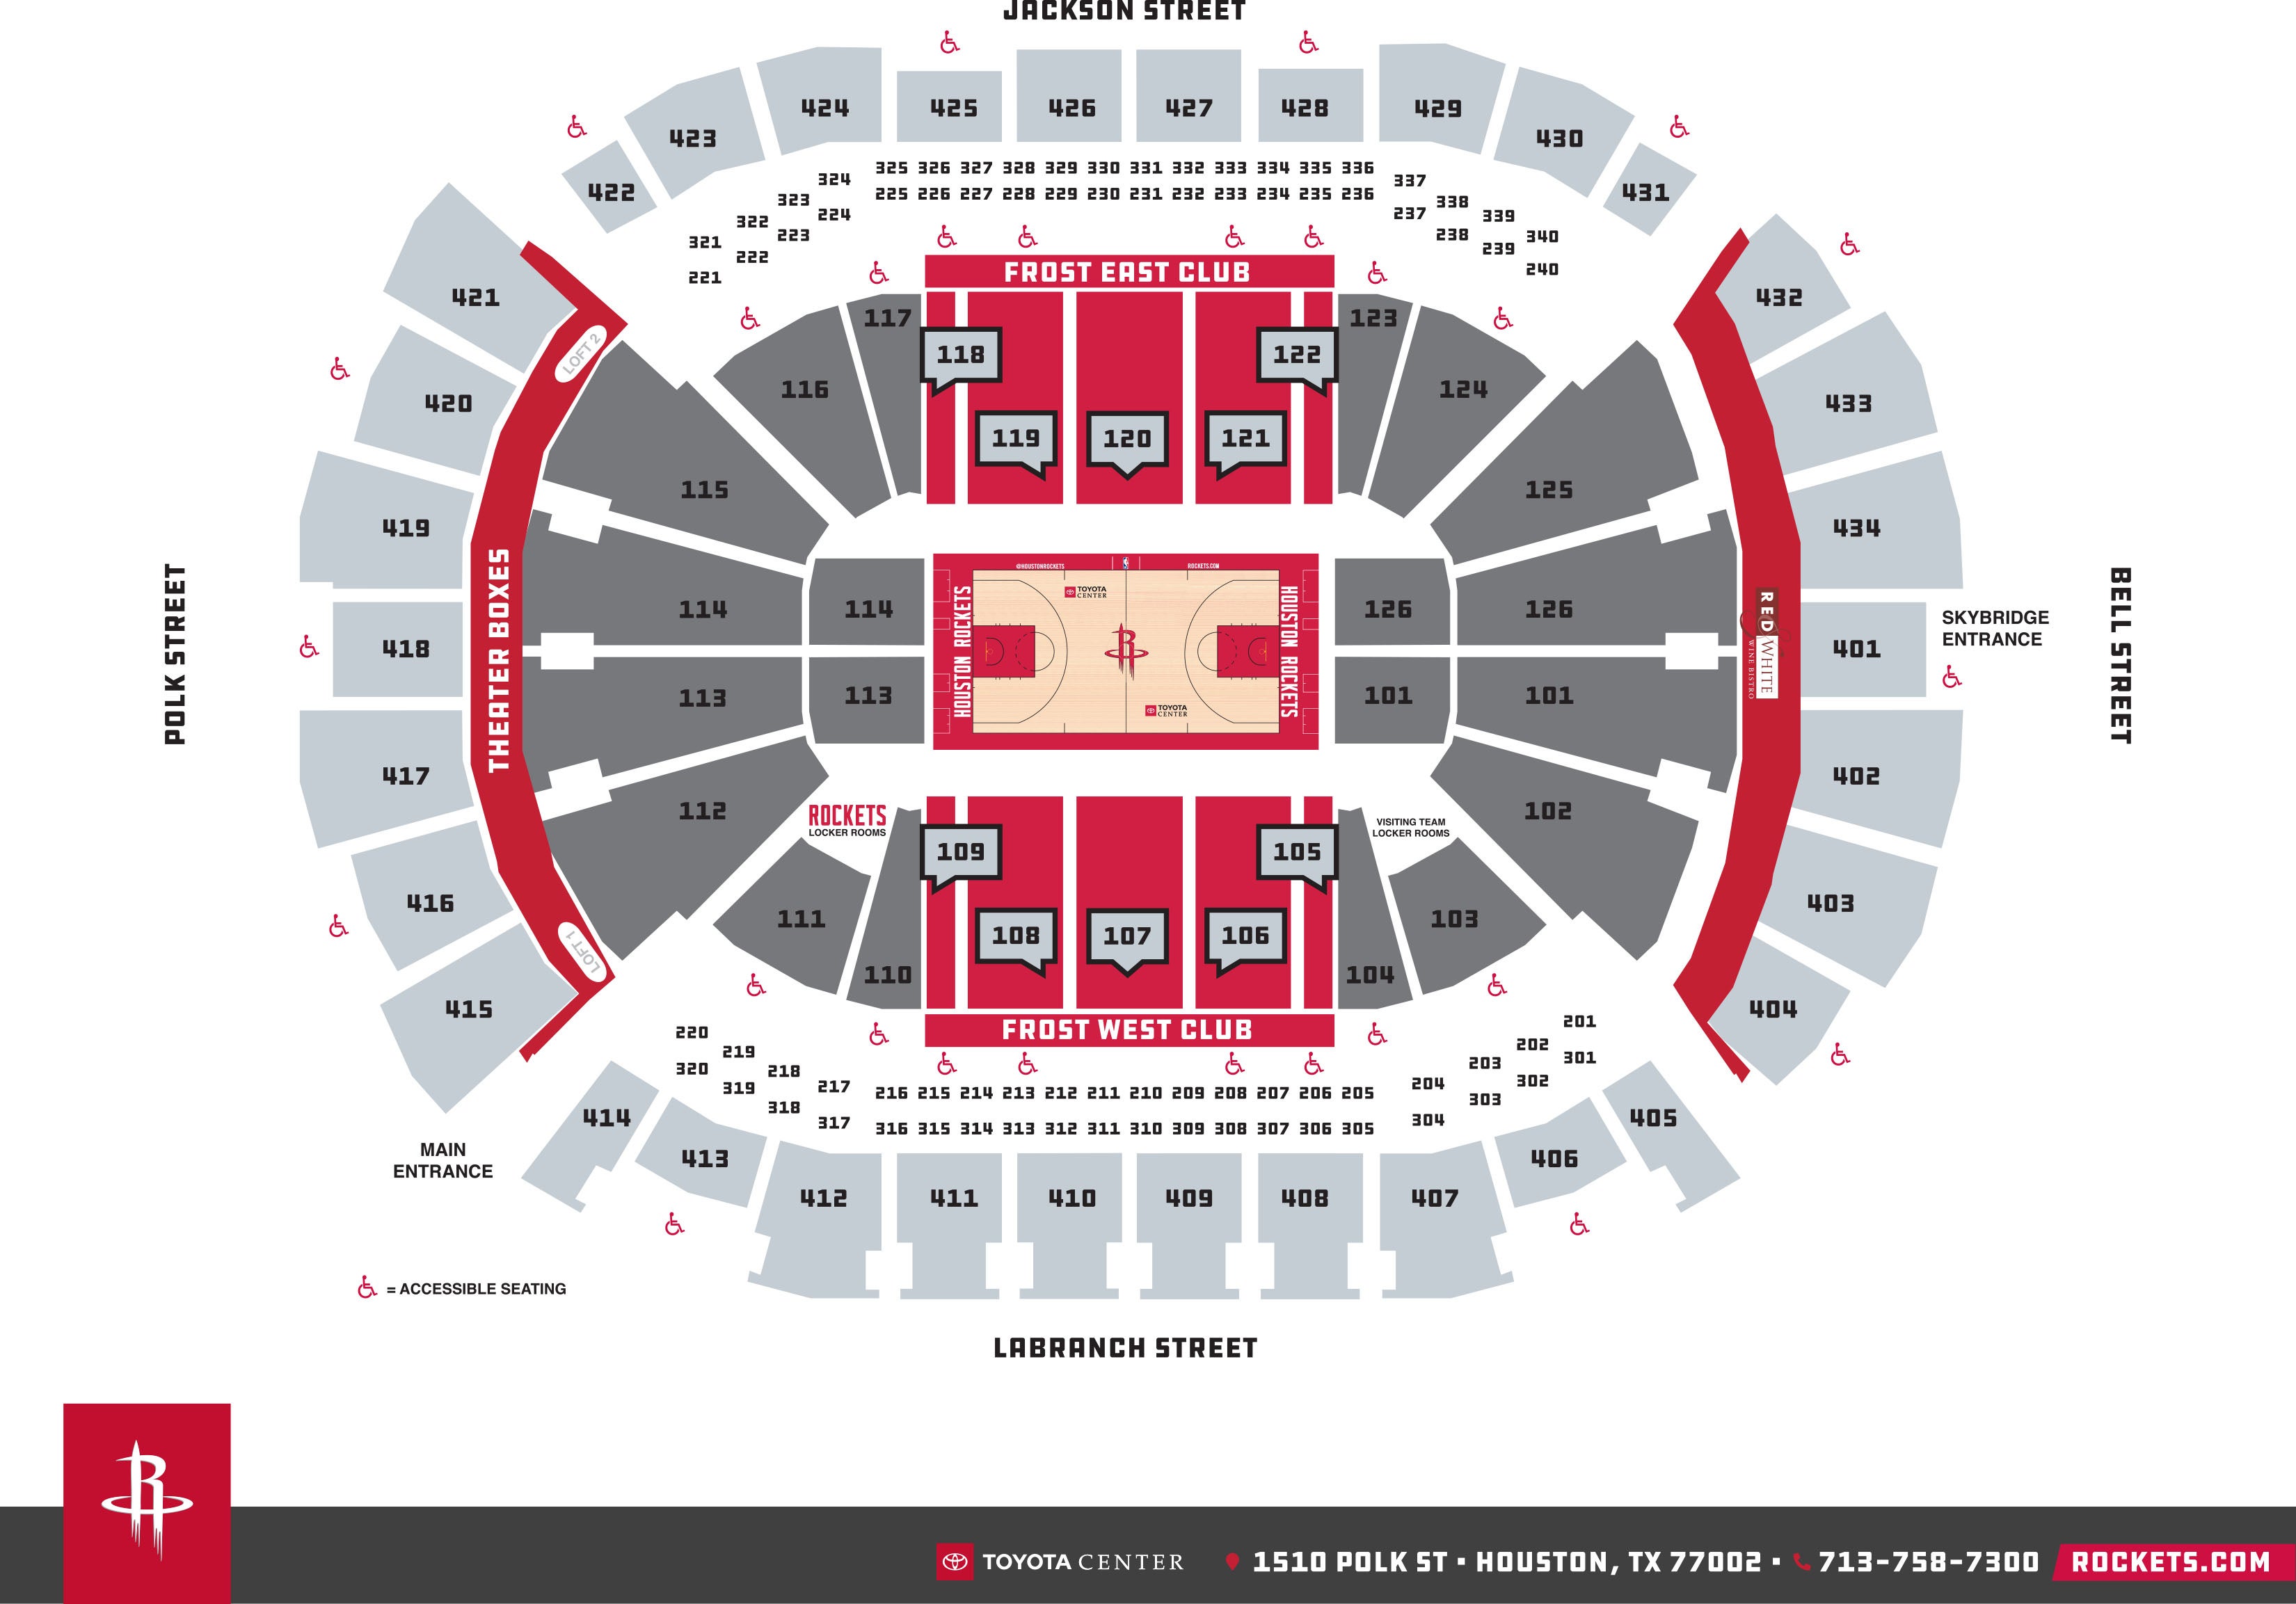 Phoenix Suns Arena Seating Chart | Elcho Table